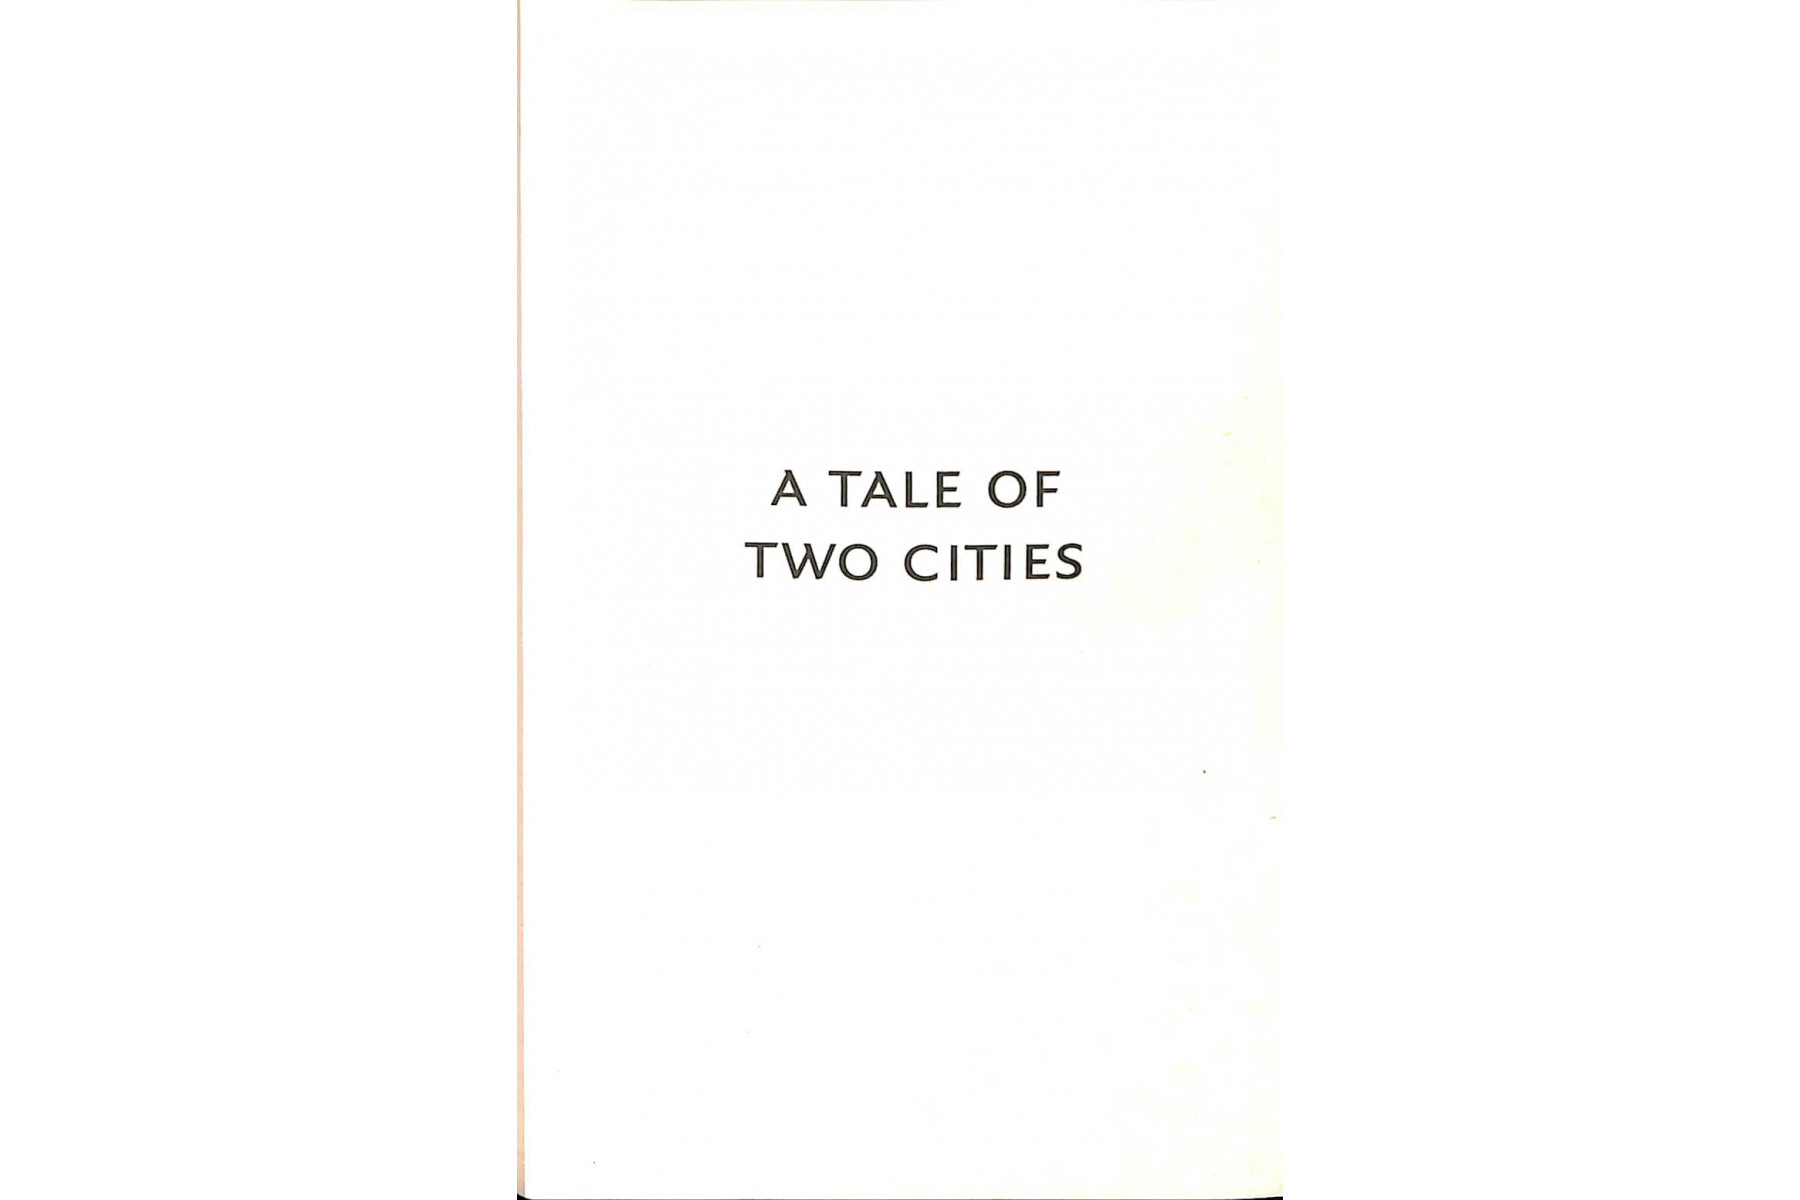 A Tale of Two Cities (Collins Classics)